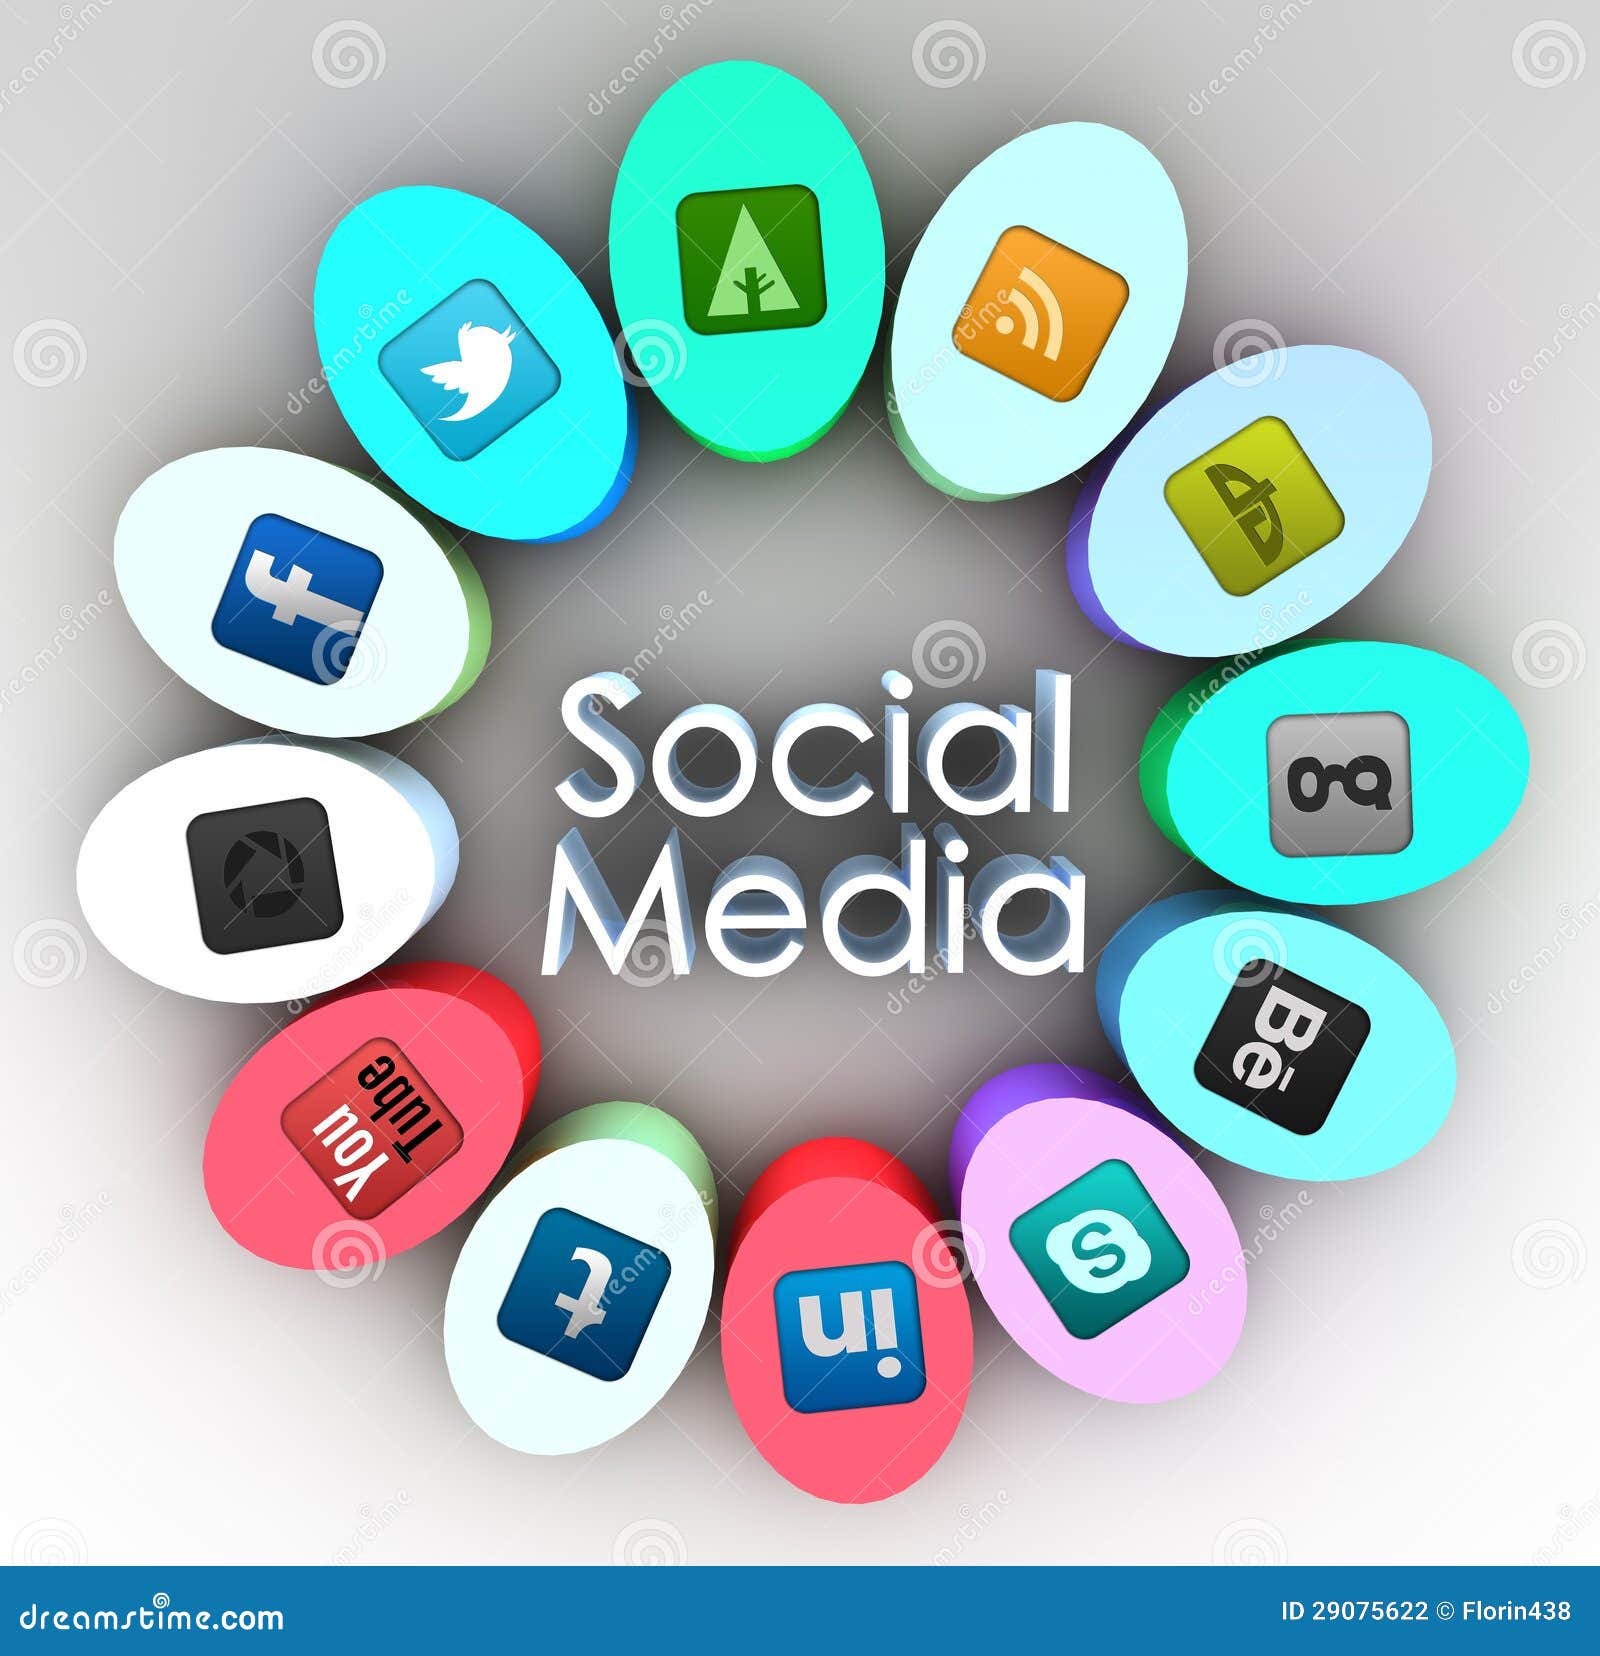 Social media flower concept with social icons.